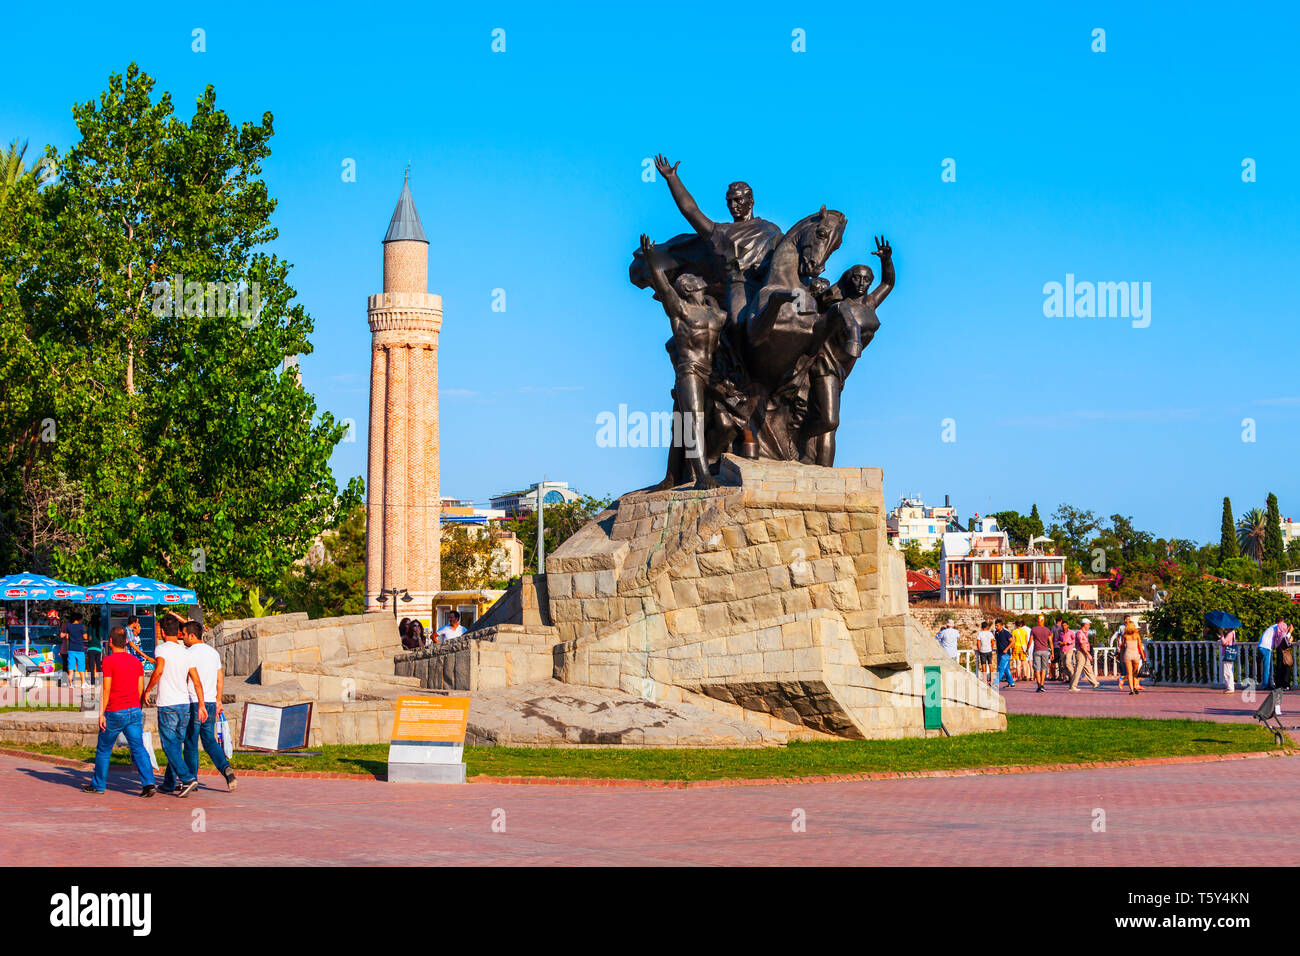 ANTALYA, TURKEY - SEPTEMBER 14, 2014: Republic Square is a main square in Antalya old town or Kaleici in Turkey Stock Photo